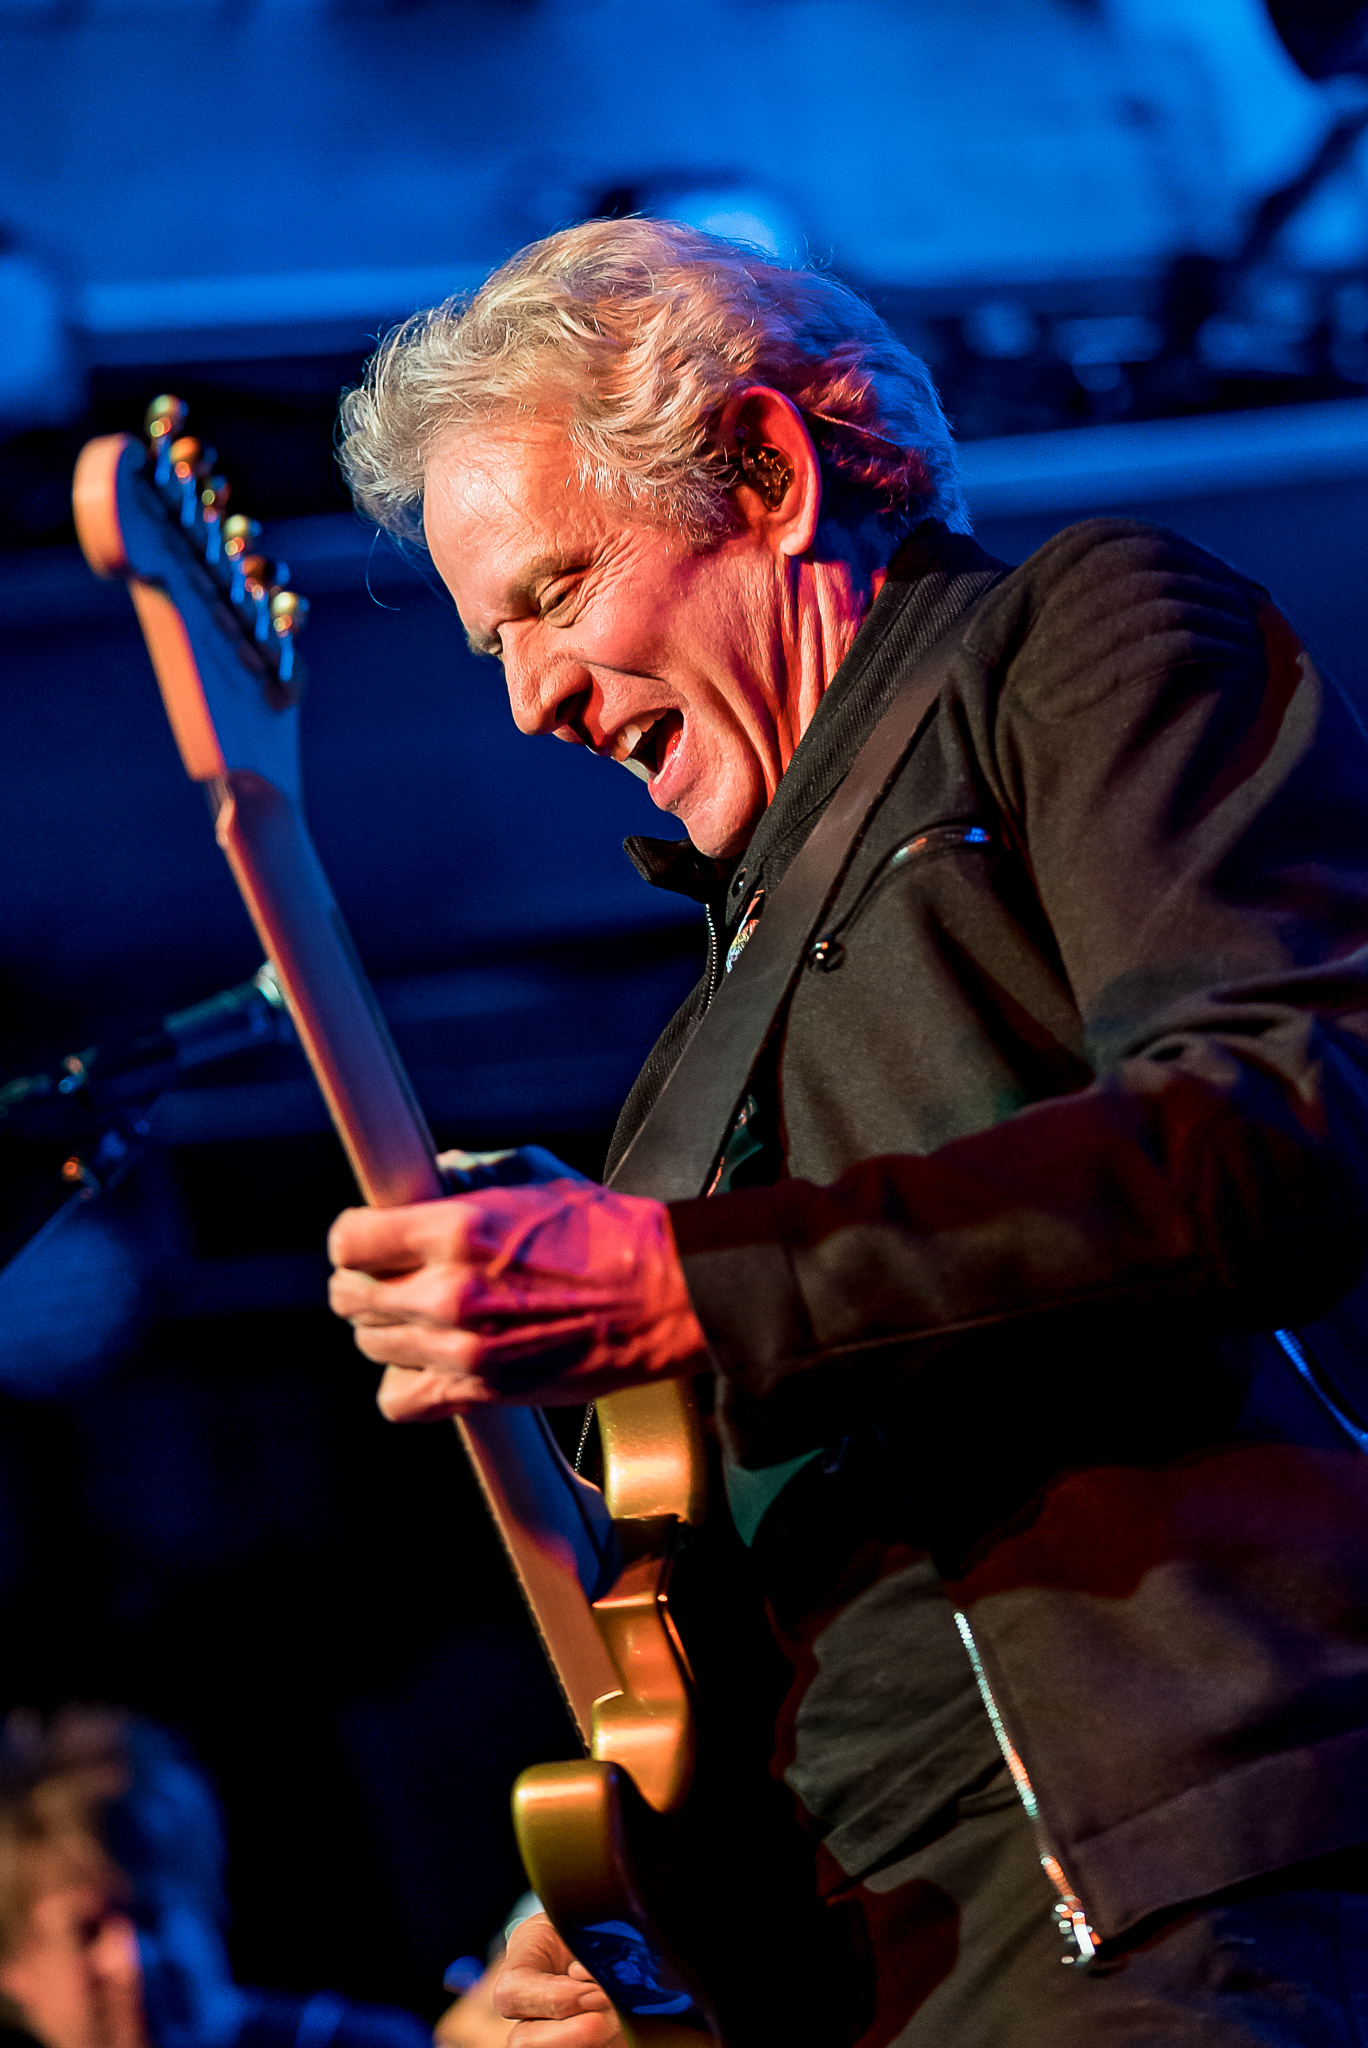 Concert Photos Don Felder soars at the Narrows Center What's Up Newp